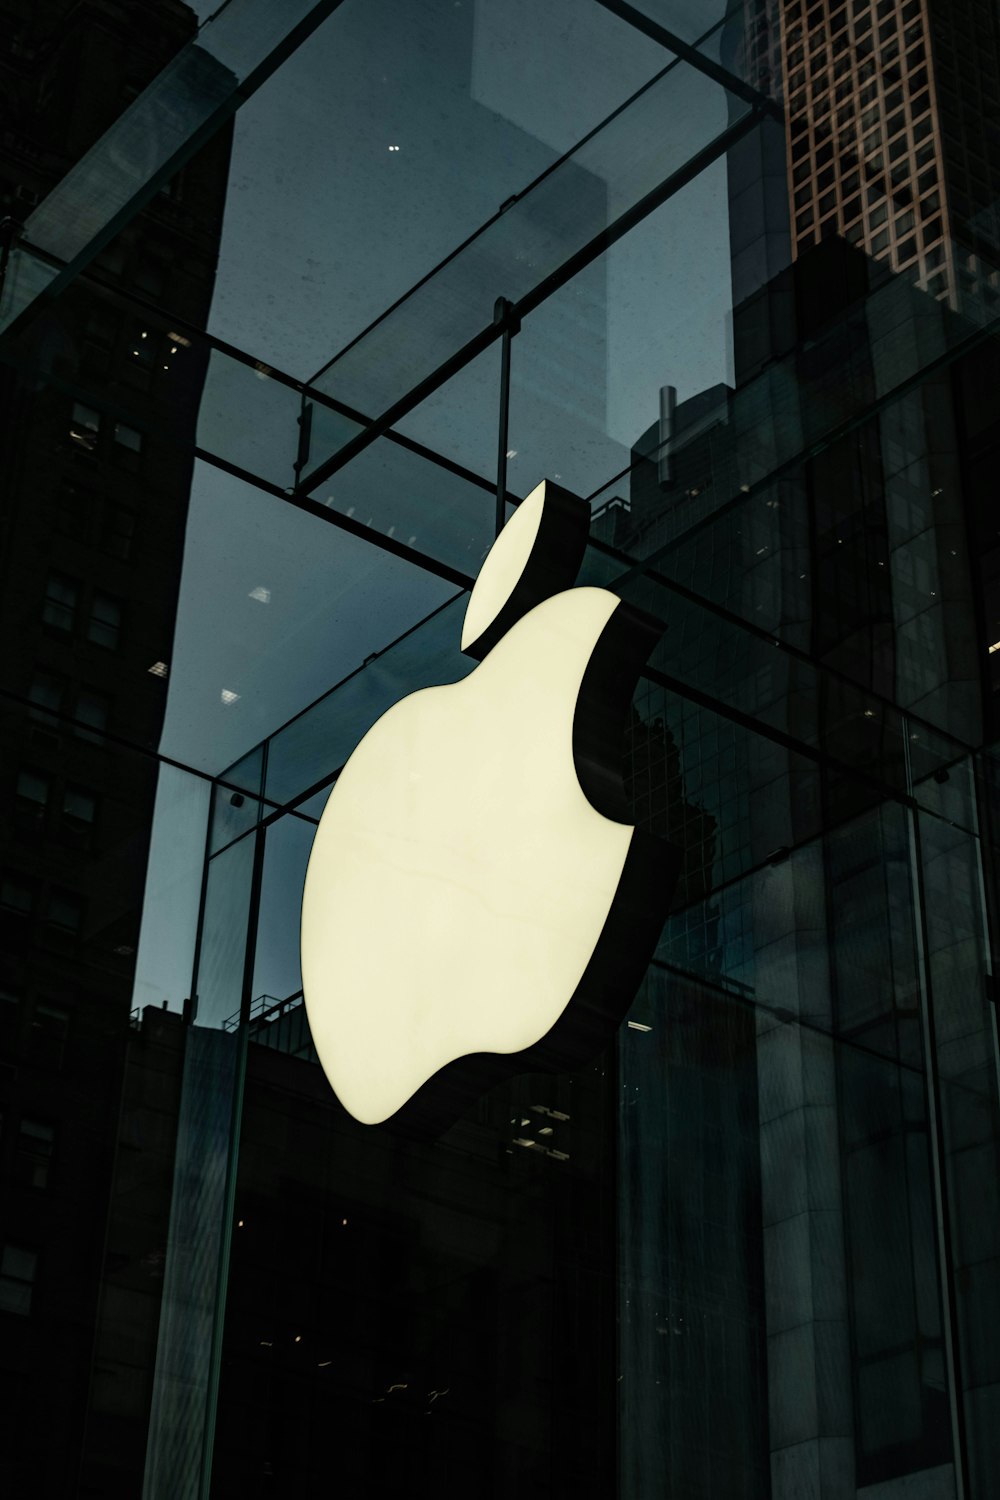 an apple logo is shown in front of a glass building